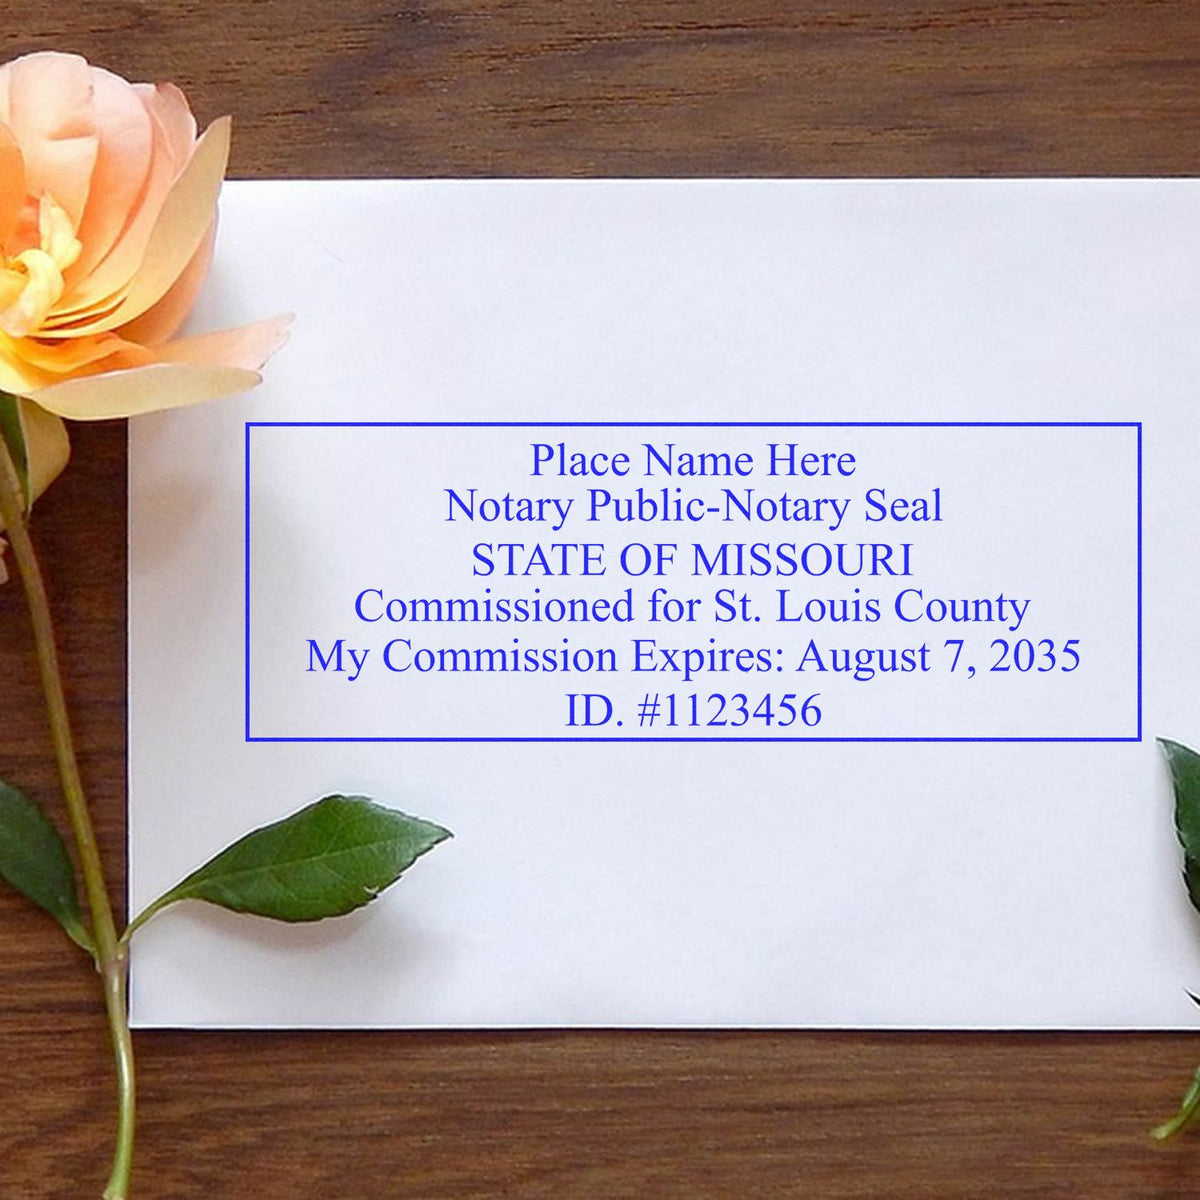 An alternative view of the Super Slim Missouri Notary Public Stamp stamped on a sheet of paper showing the image in use